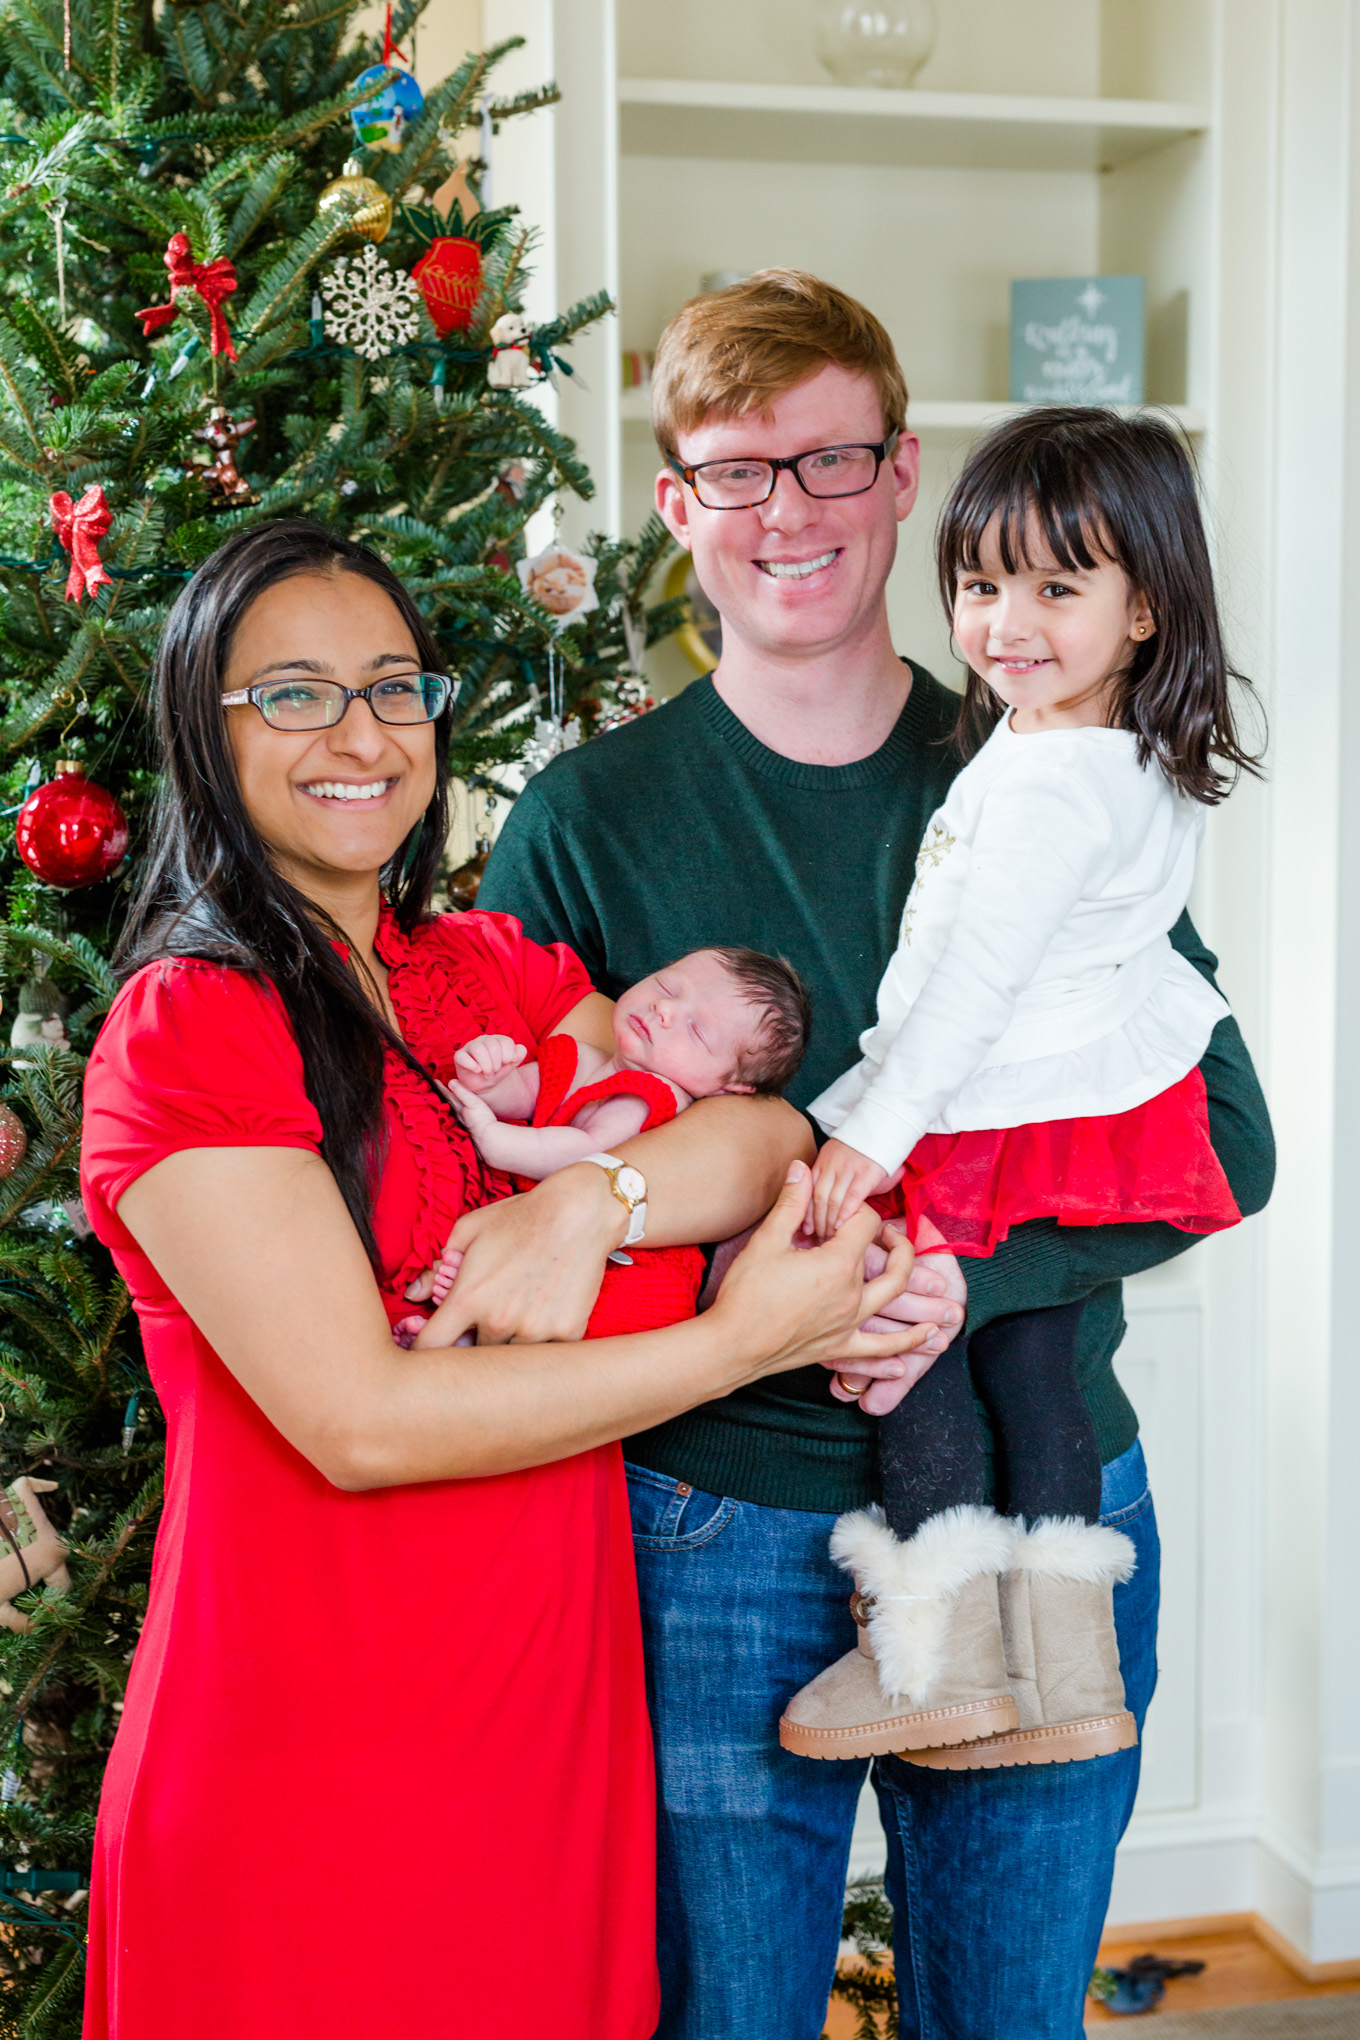 holiday newborn photos, newborn boy, baby boy, holiday photos, Christmas baby, brown haired baby, family of four